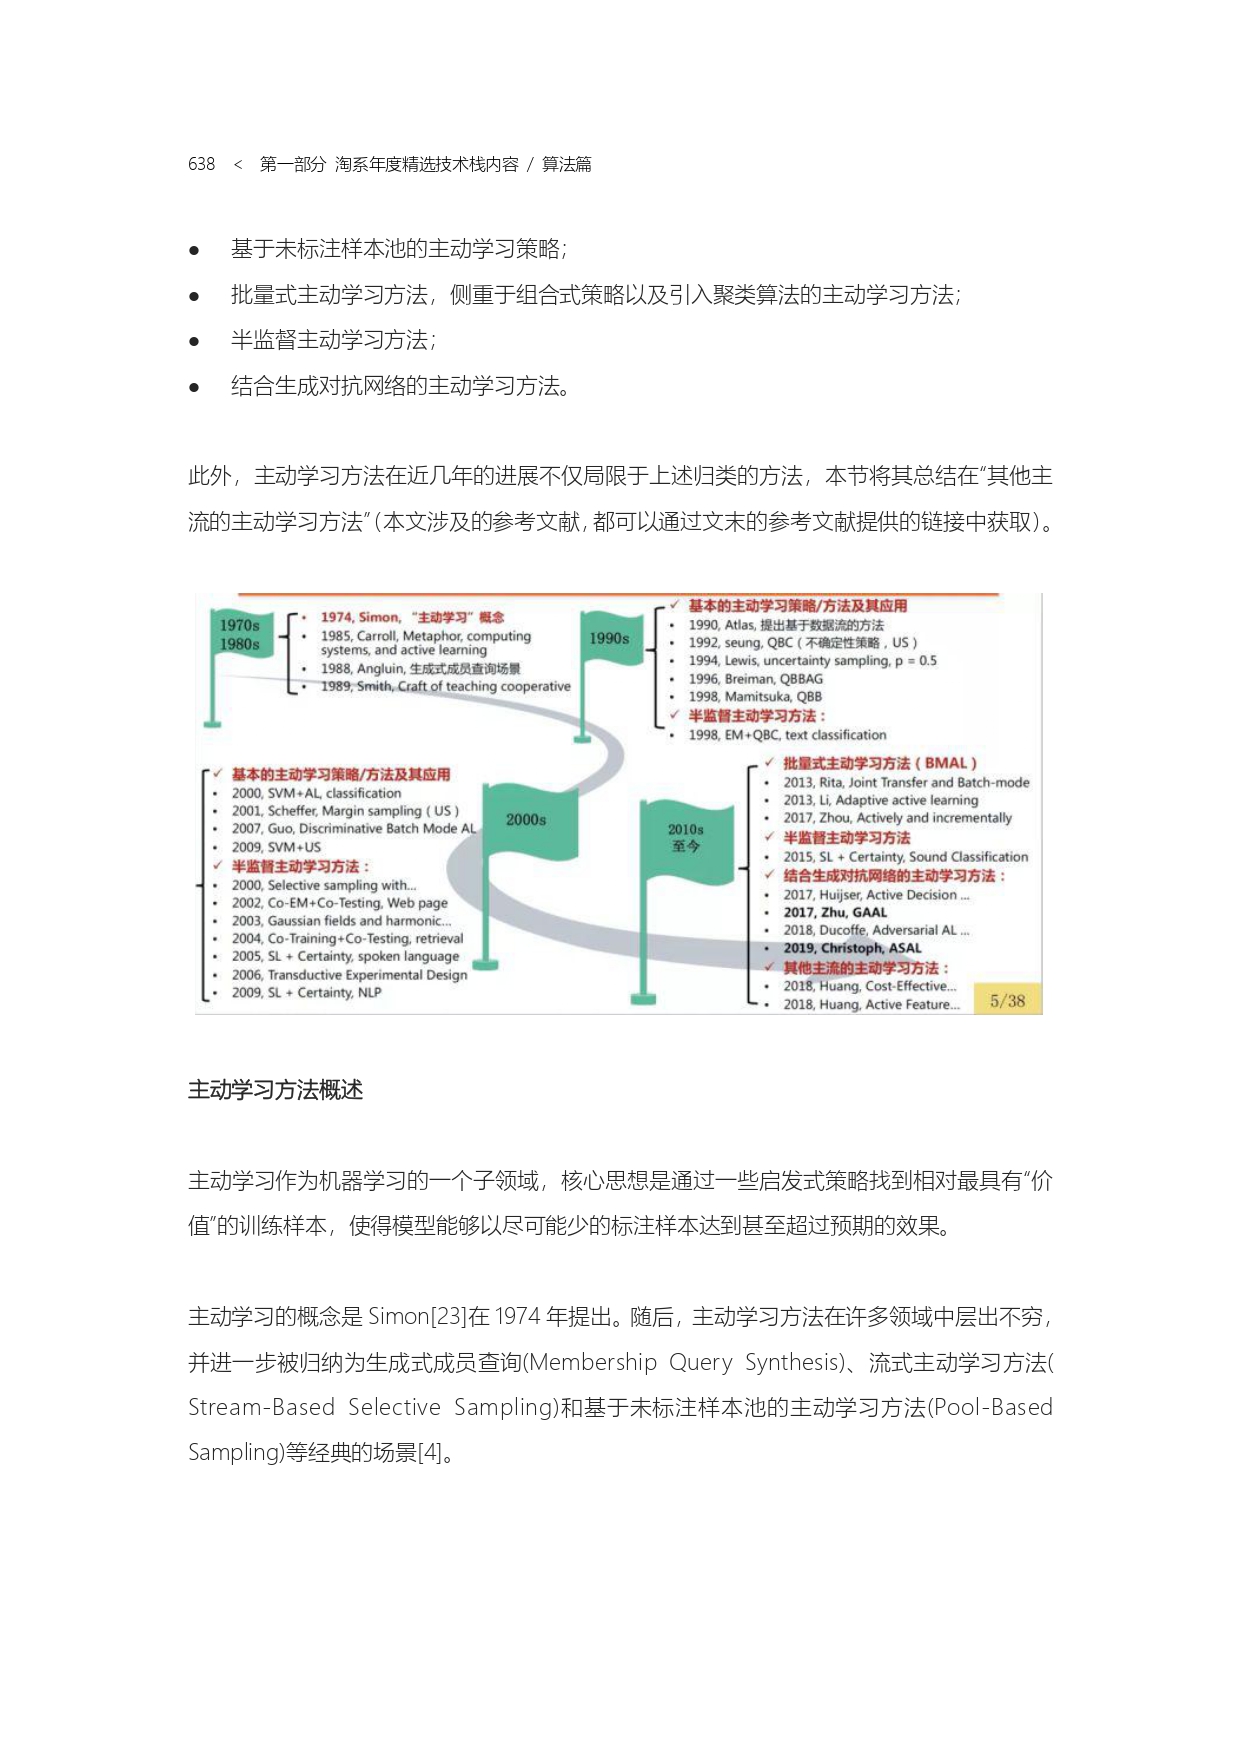 The Complete Works of Tao Technology 2020-571-1189-1-300_page-0068.jpg